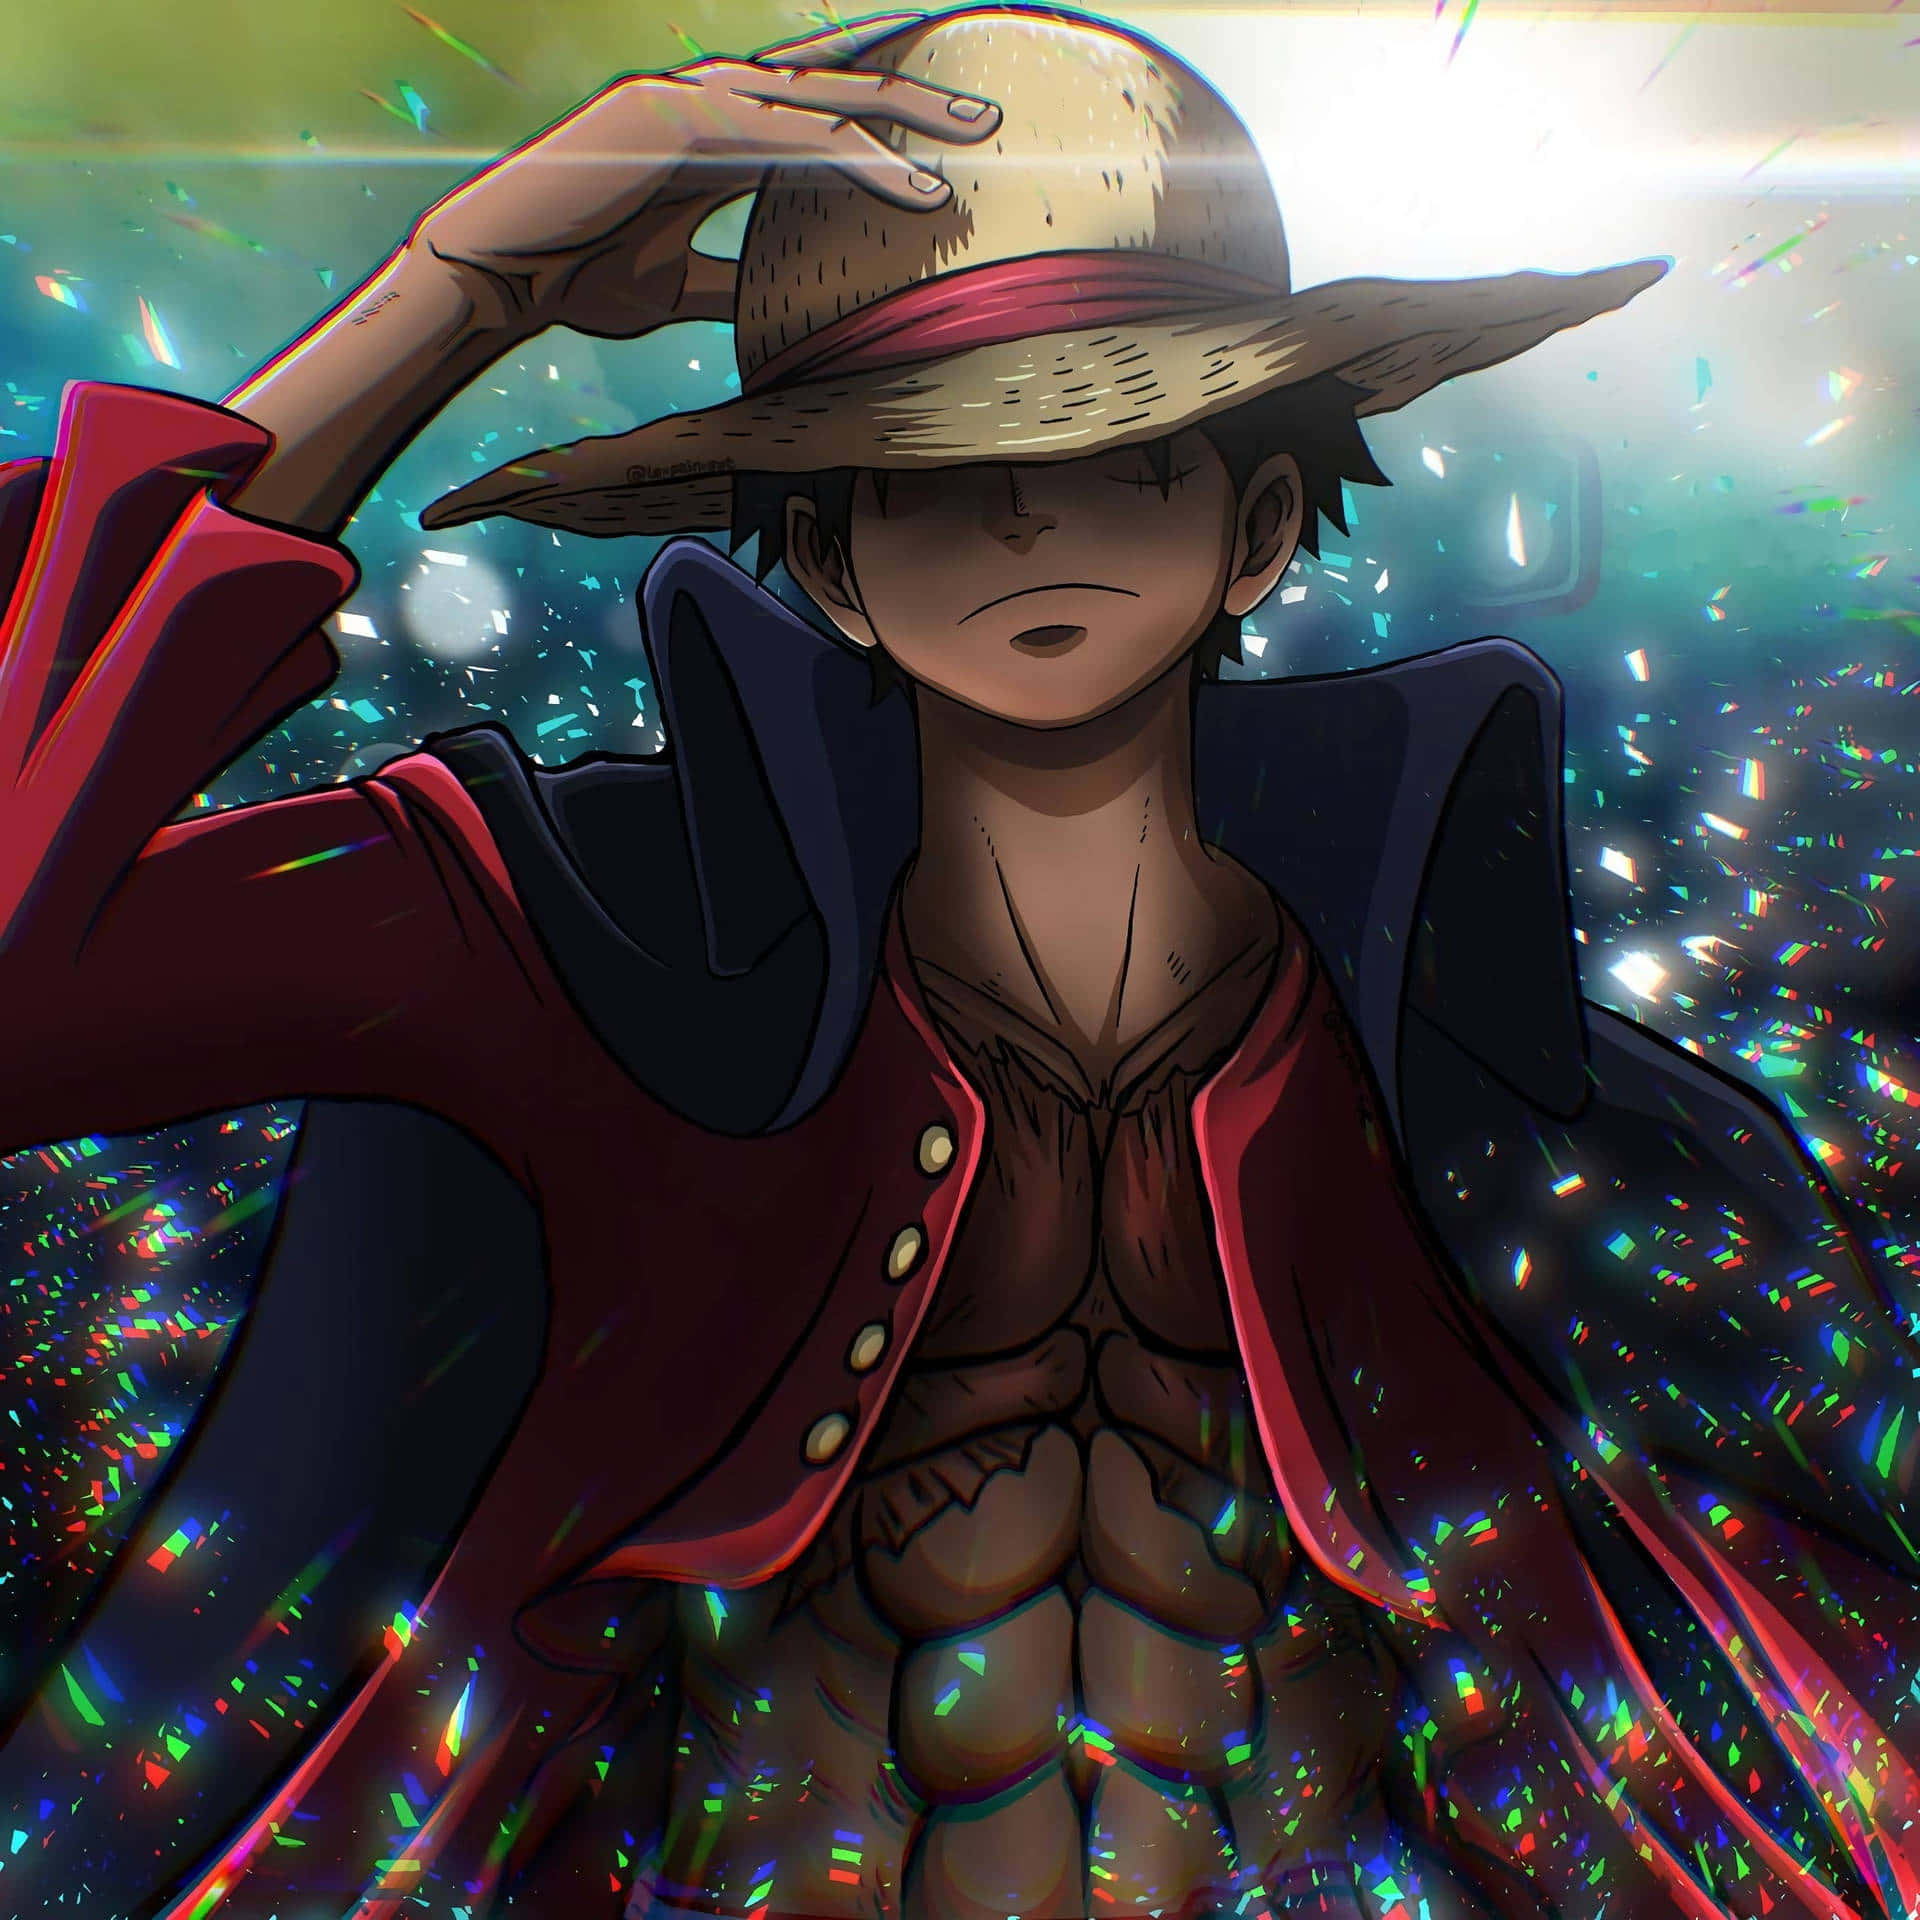 Download Luffy departs on an adventure!